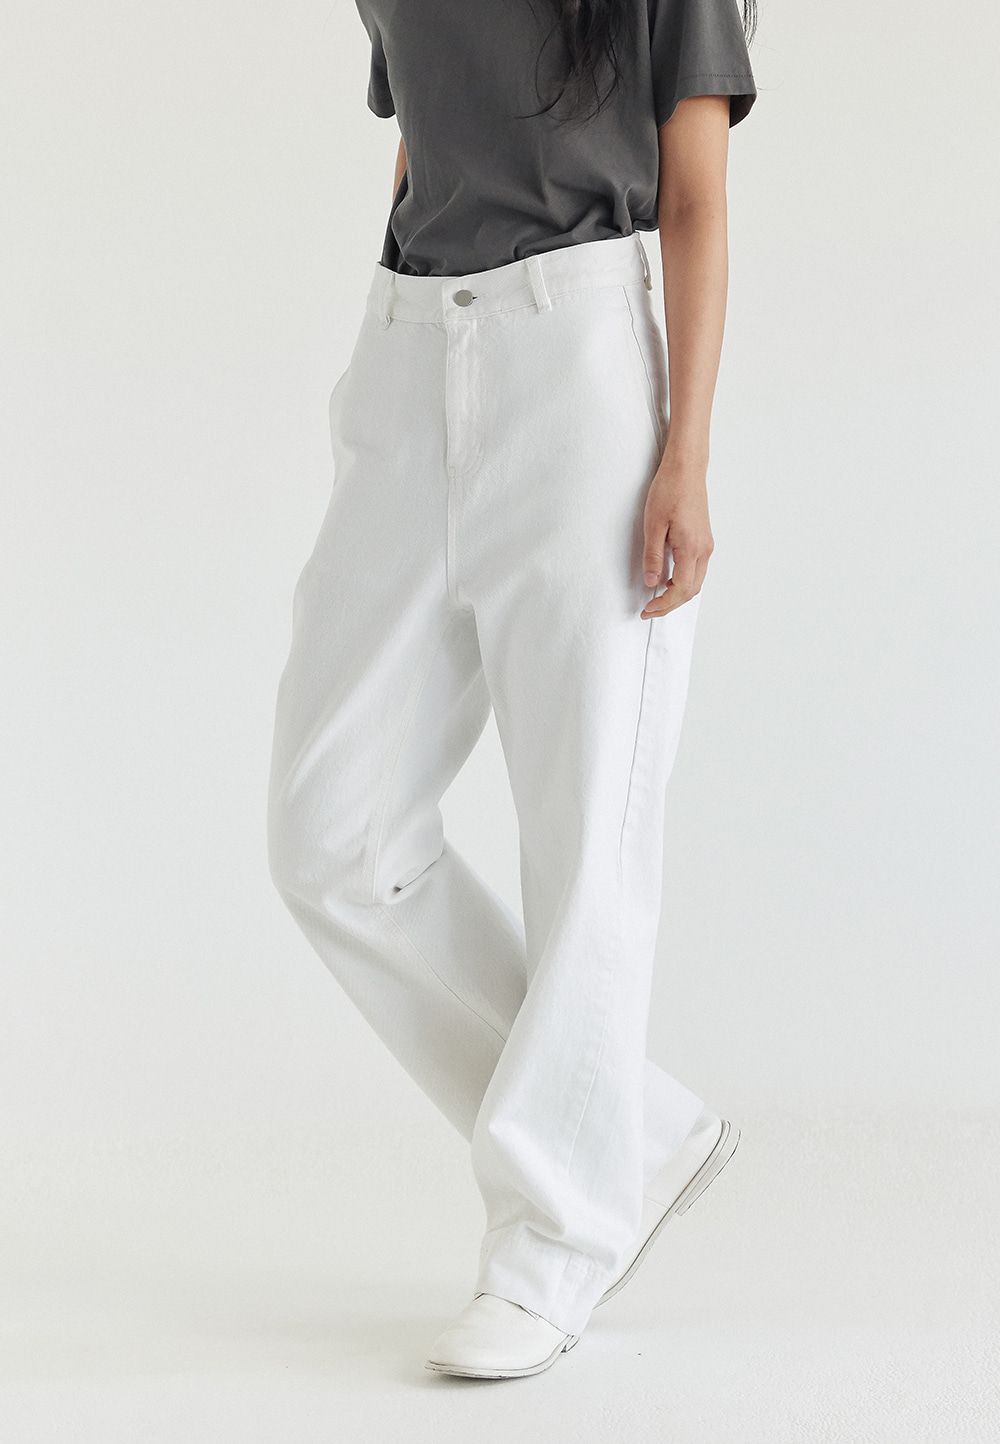 RELAXED FIT WHITE DENIM     (3 SIZE)